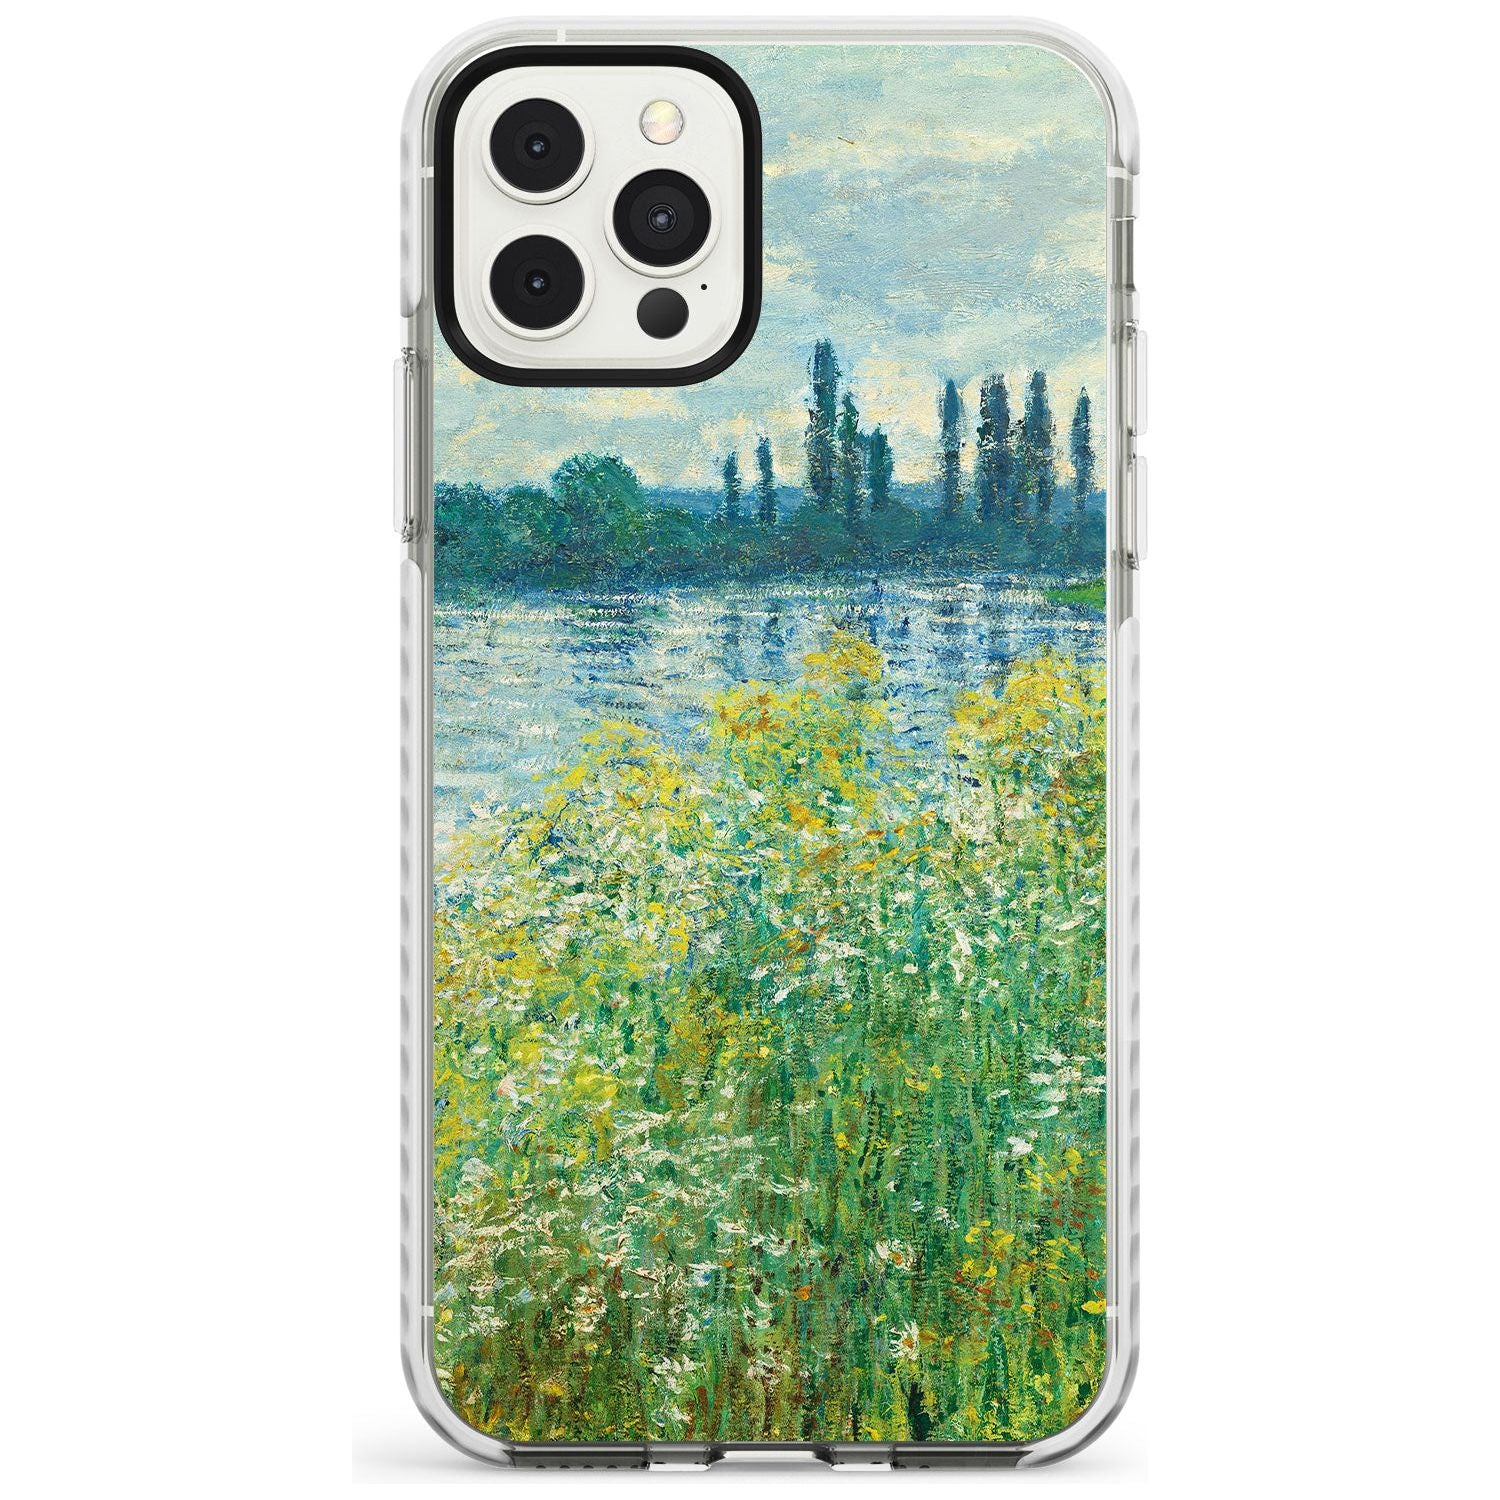 Banks of the Seine by Claude Monet Slim TPU Phone Case for iPhone 11 Pro Max